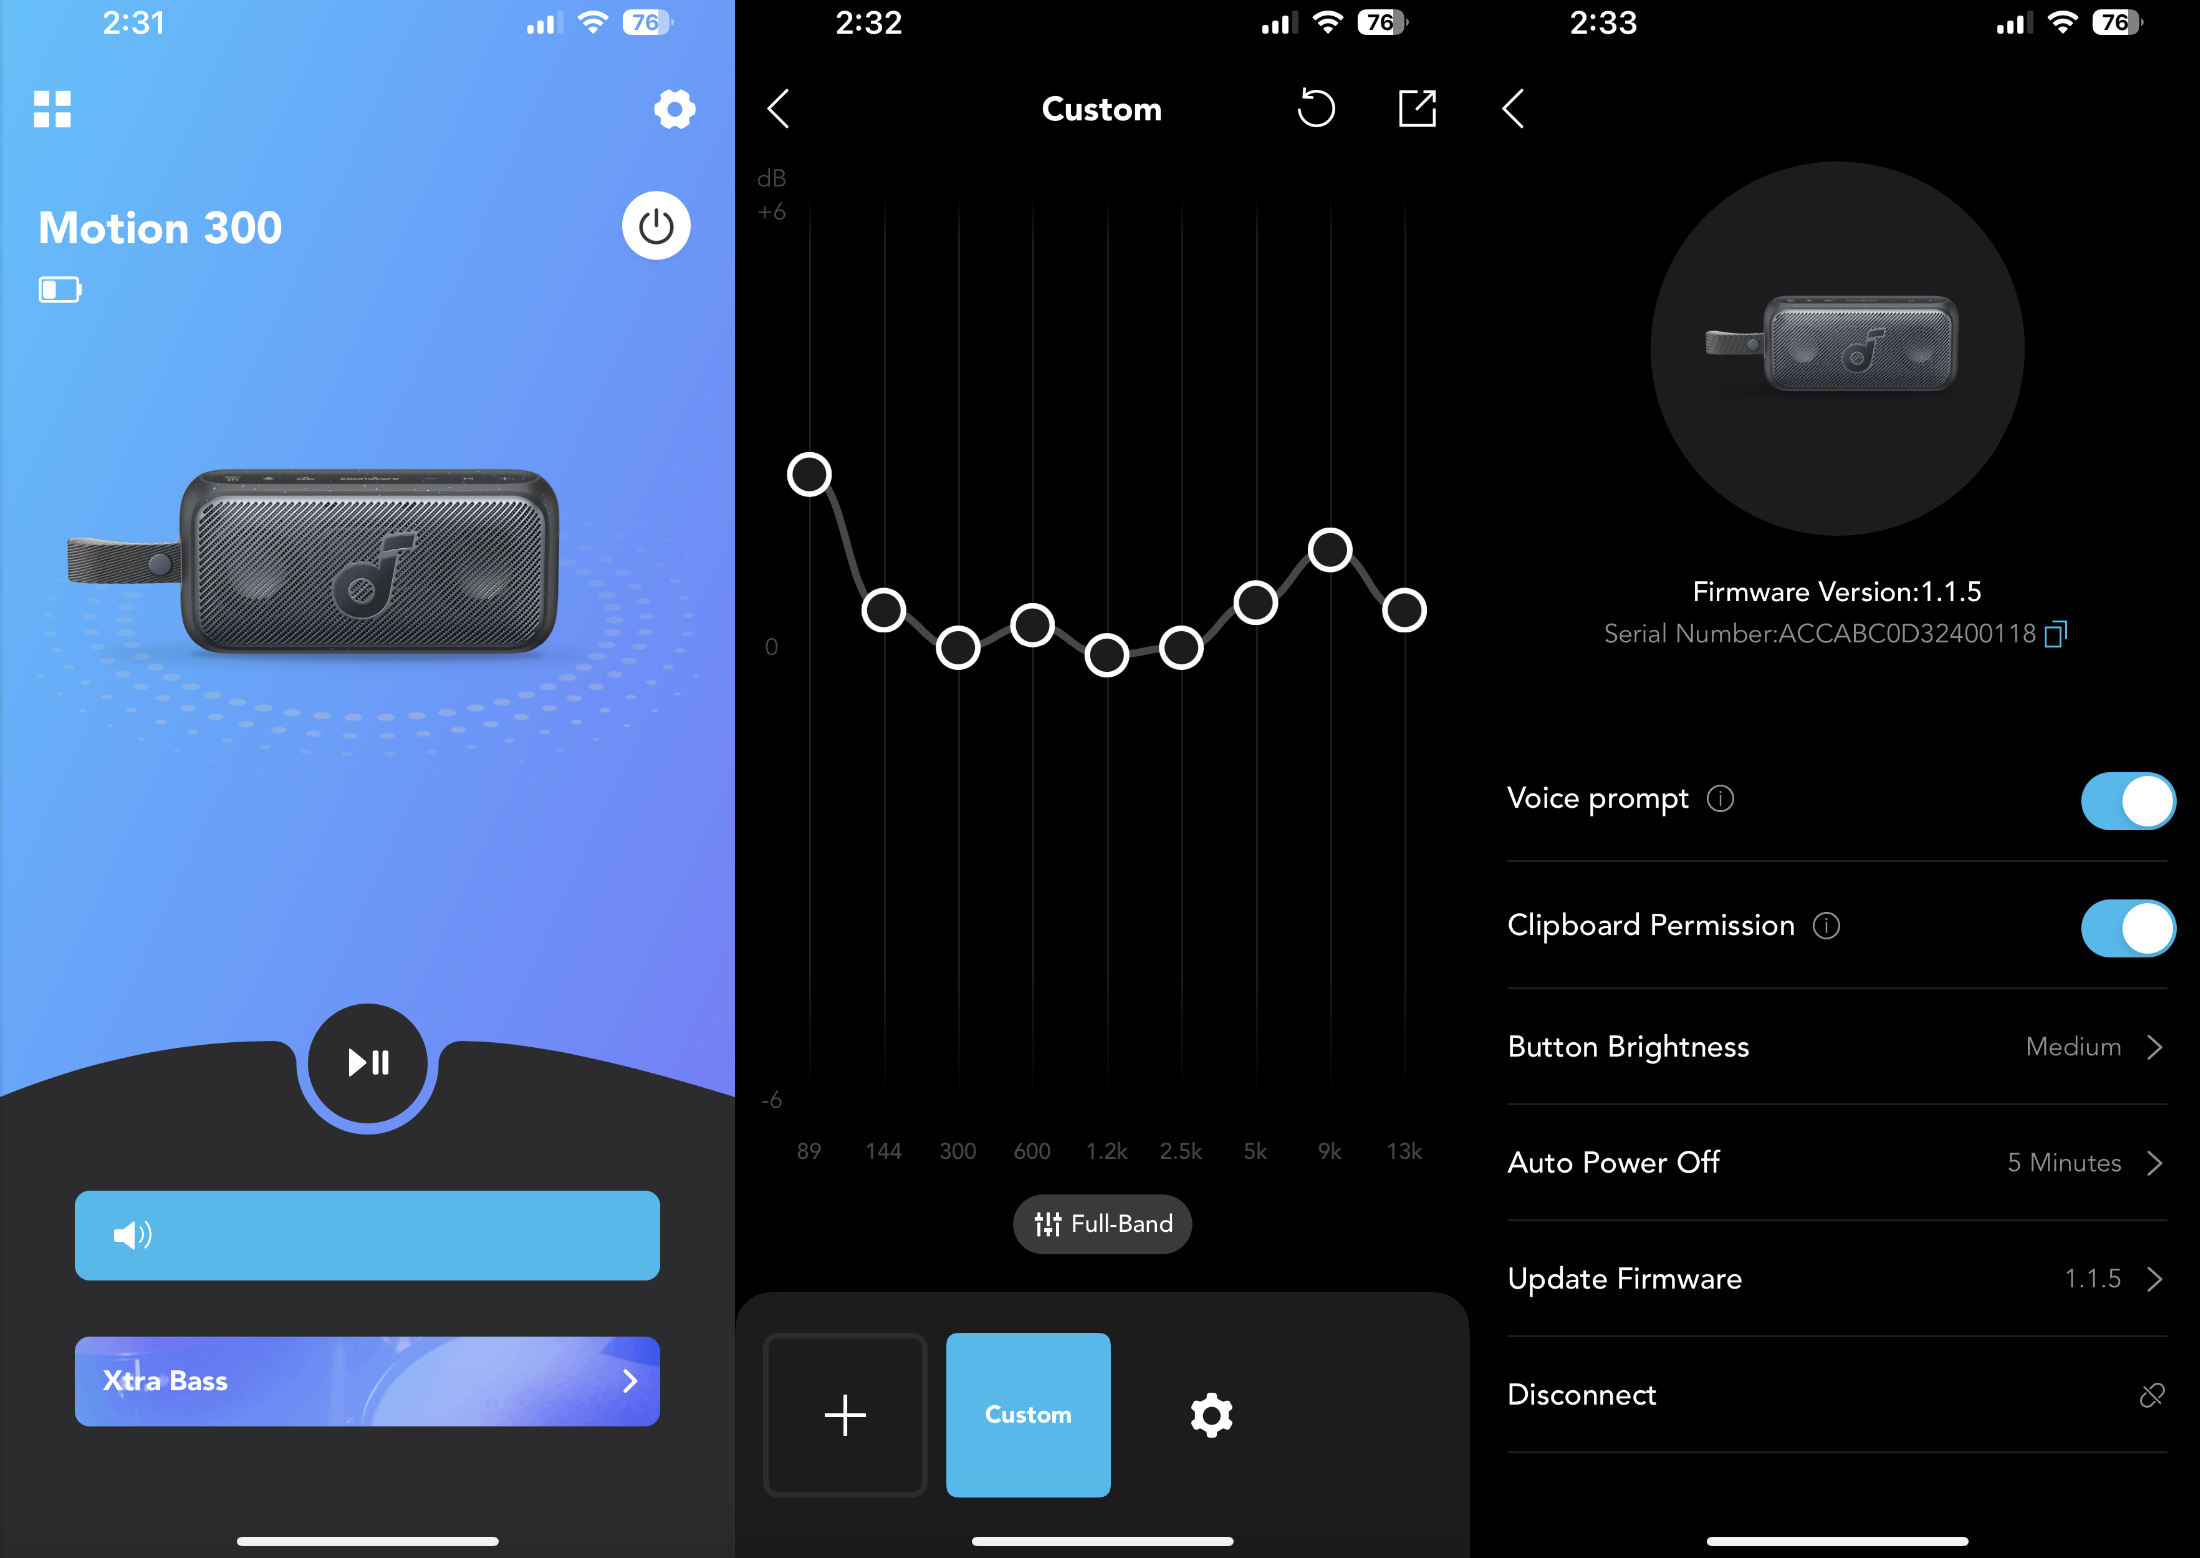 Screen captures of the various functions in the Soundcore app.